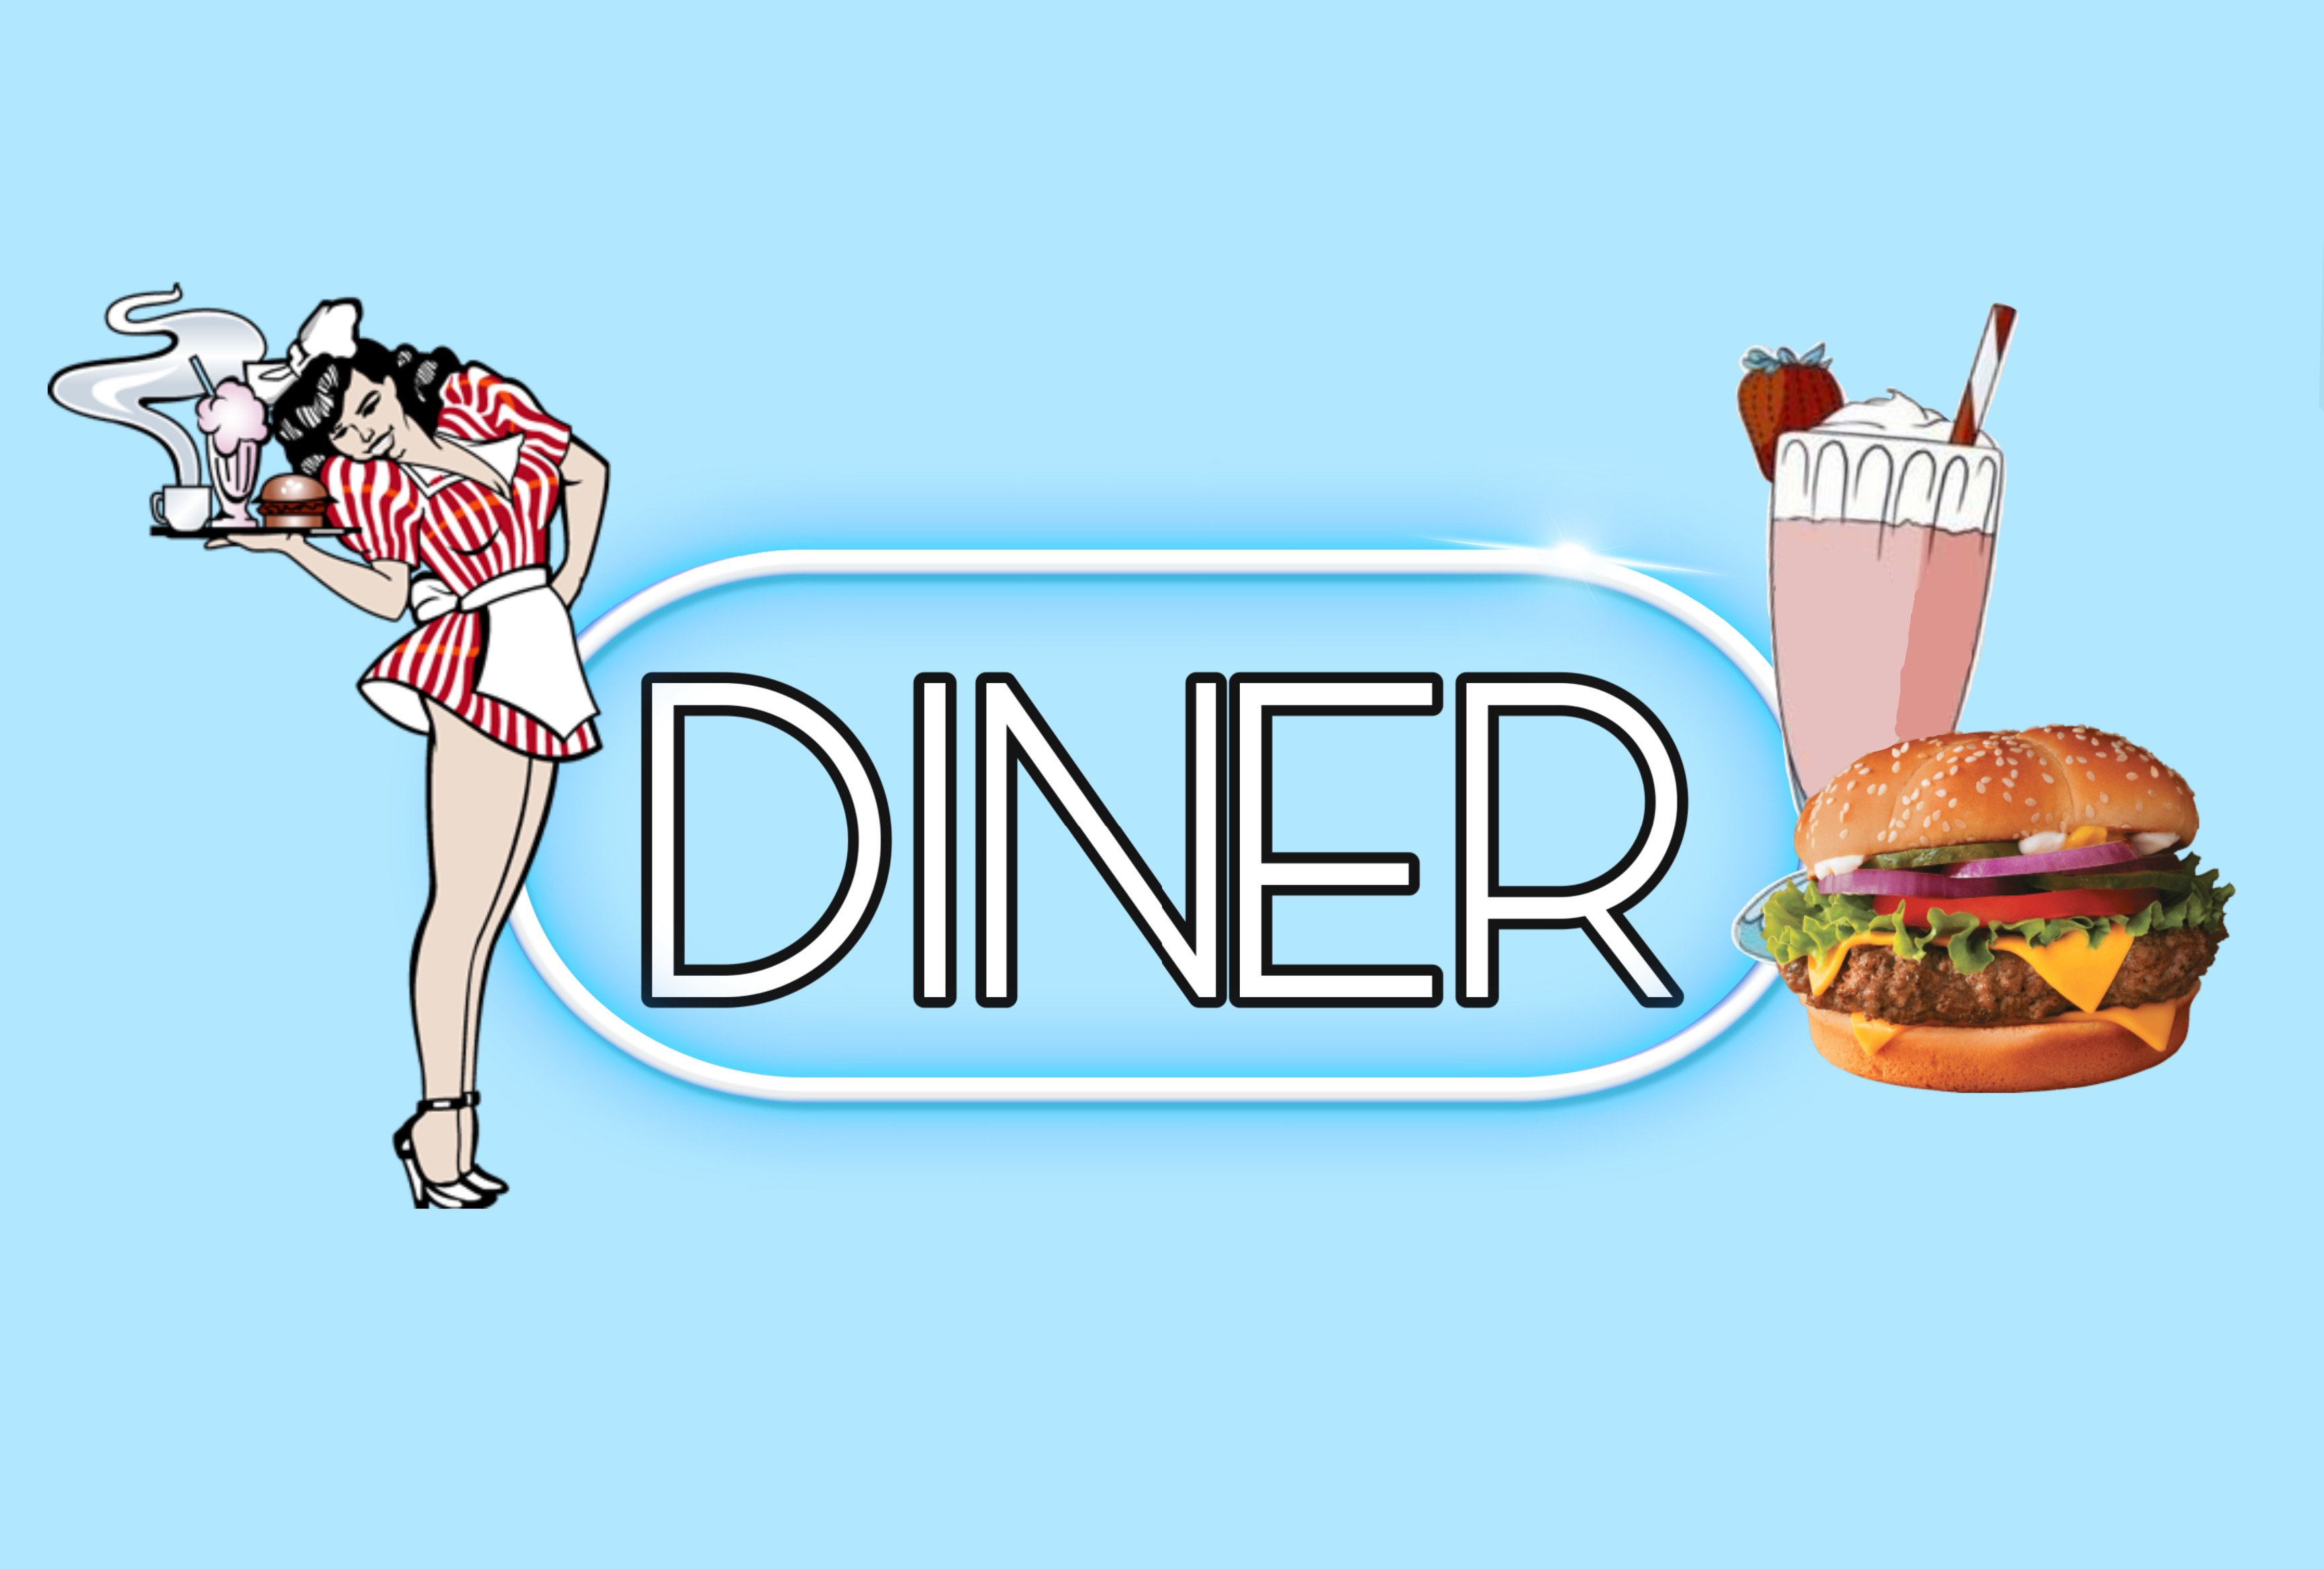 Roblox Bloxburg Decal Diner Cute Image By Velvqt - how to make a decal on roblox bloxburg